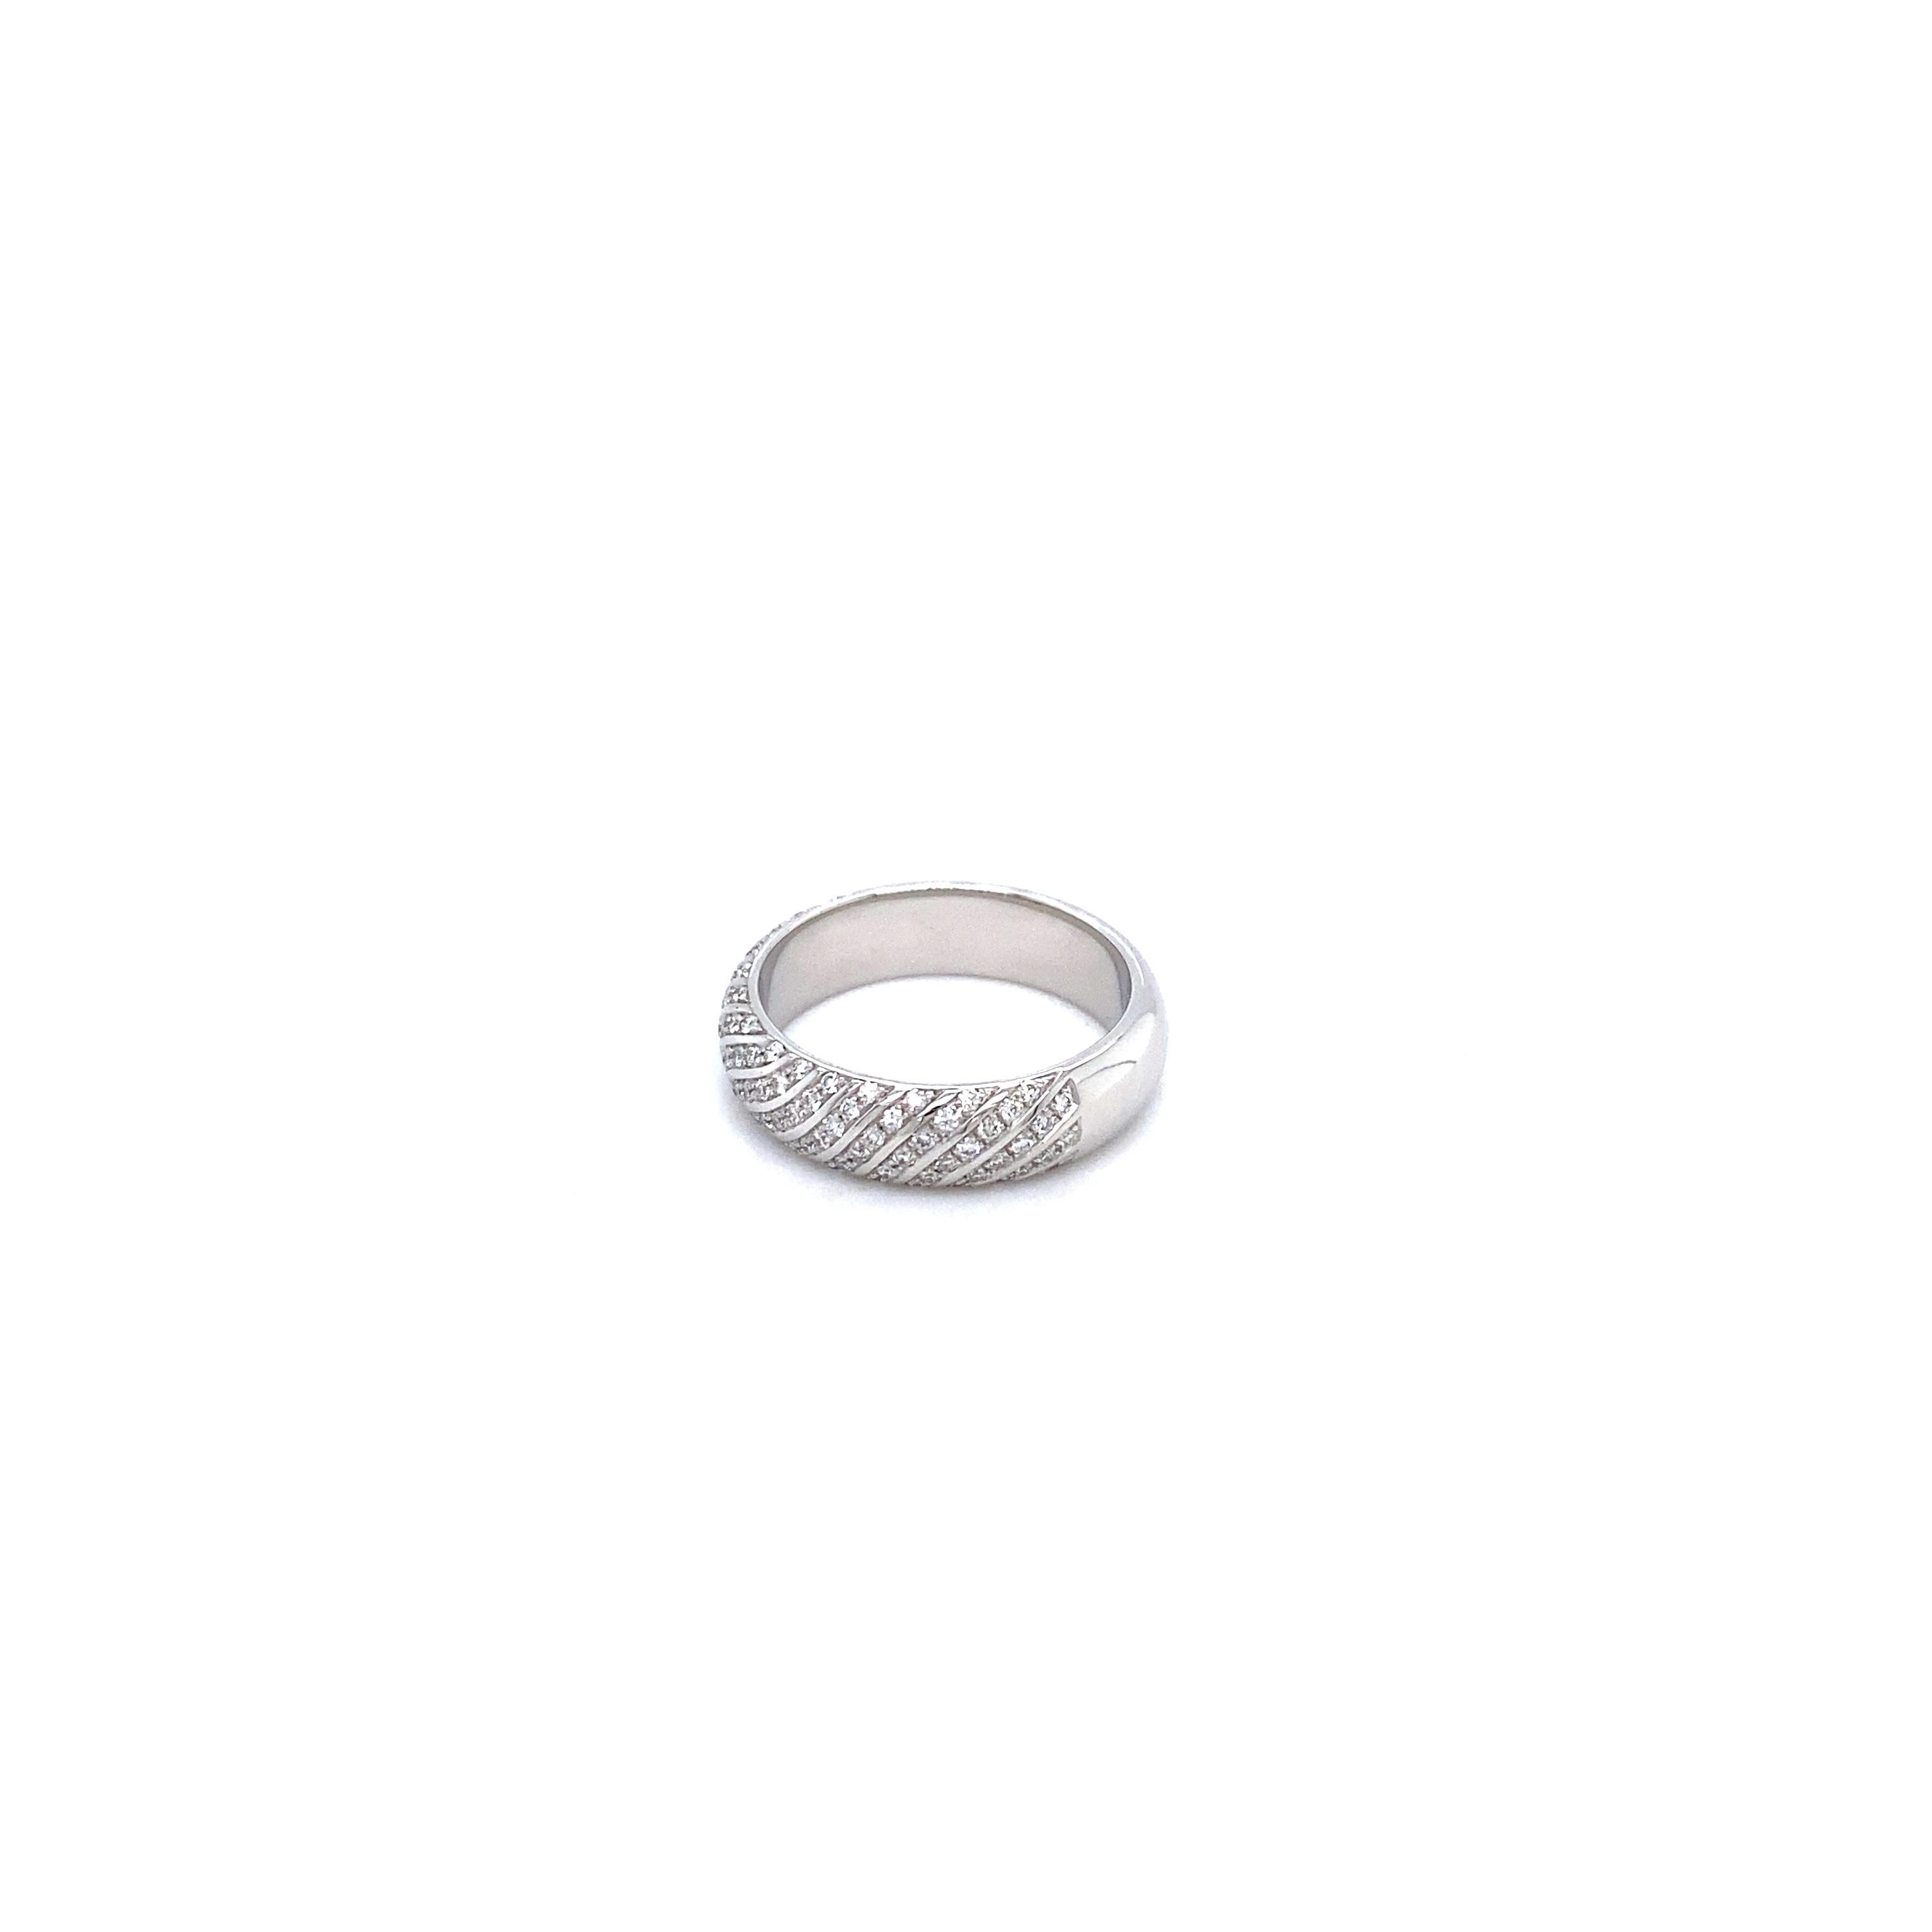 Victor Mayer Calima Ring in 18k White Gold with Diamonds For Sale 4